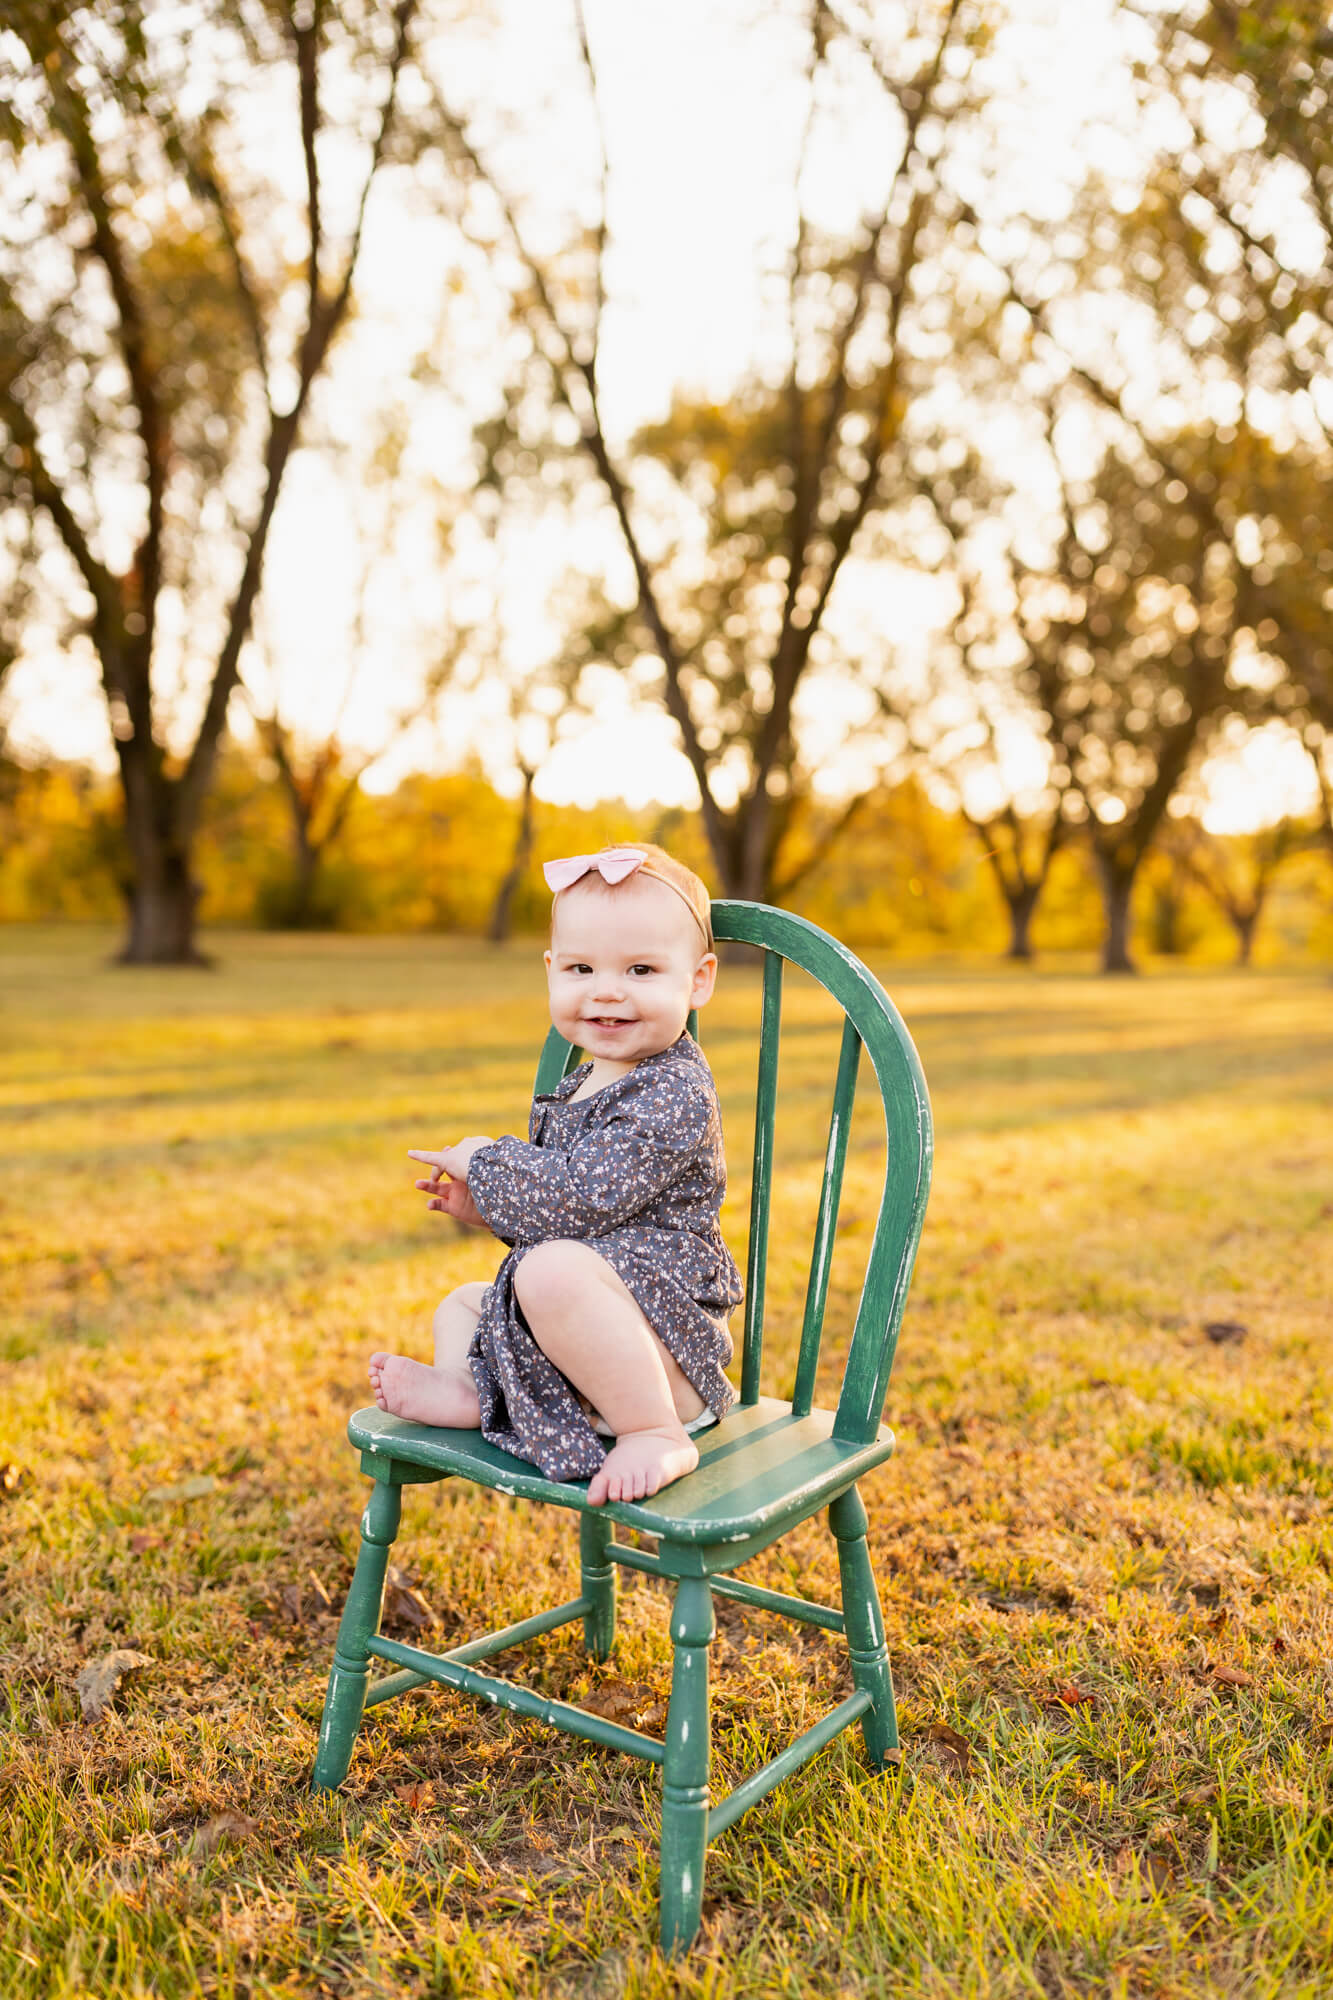 Toddler sits on a green wooden chair in a field